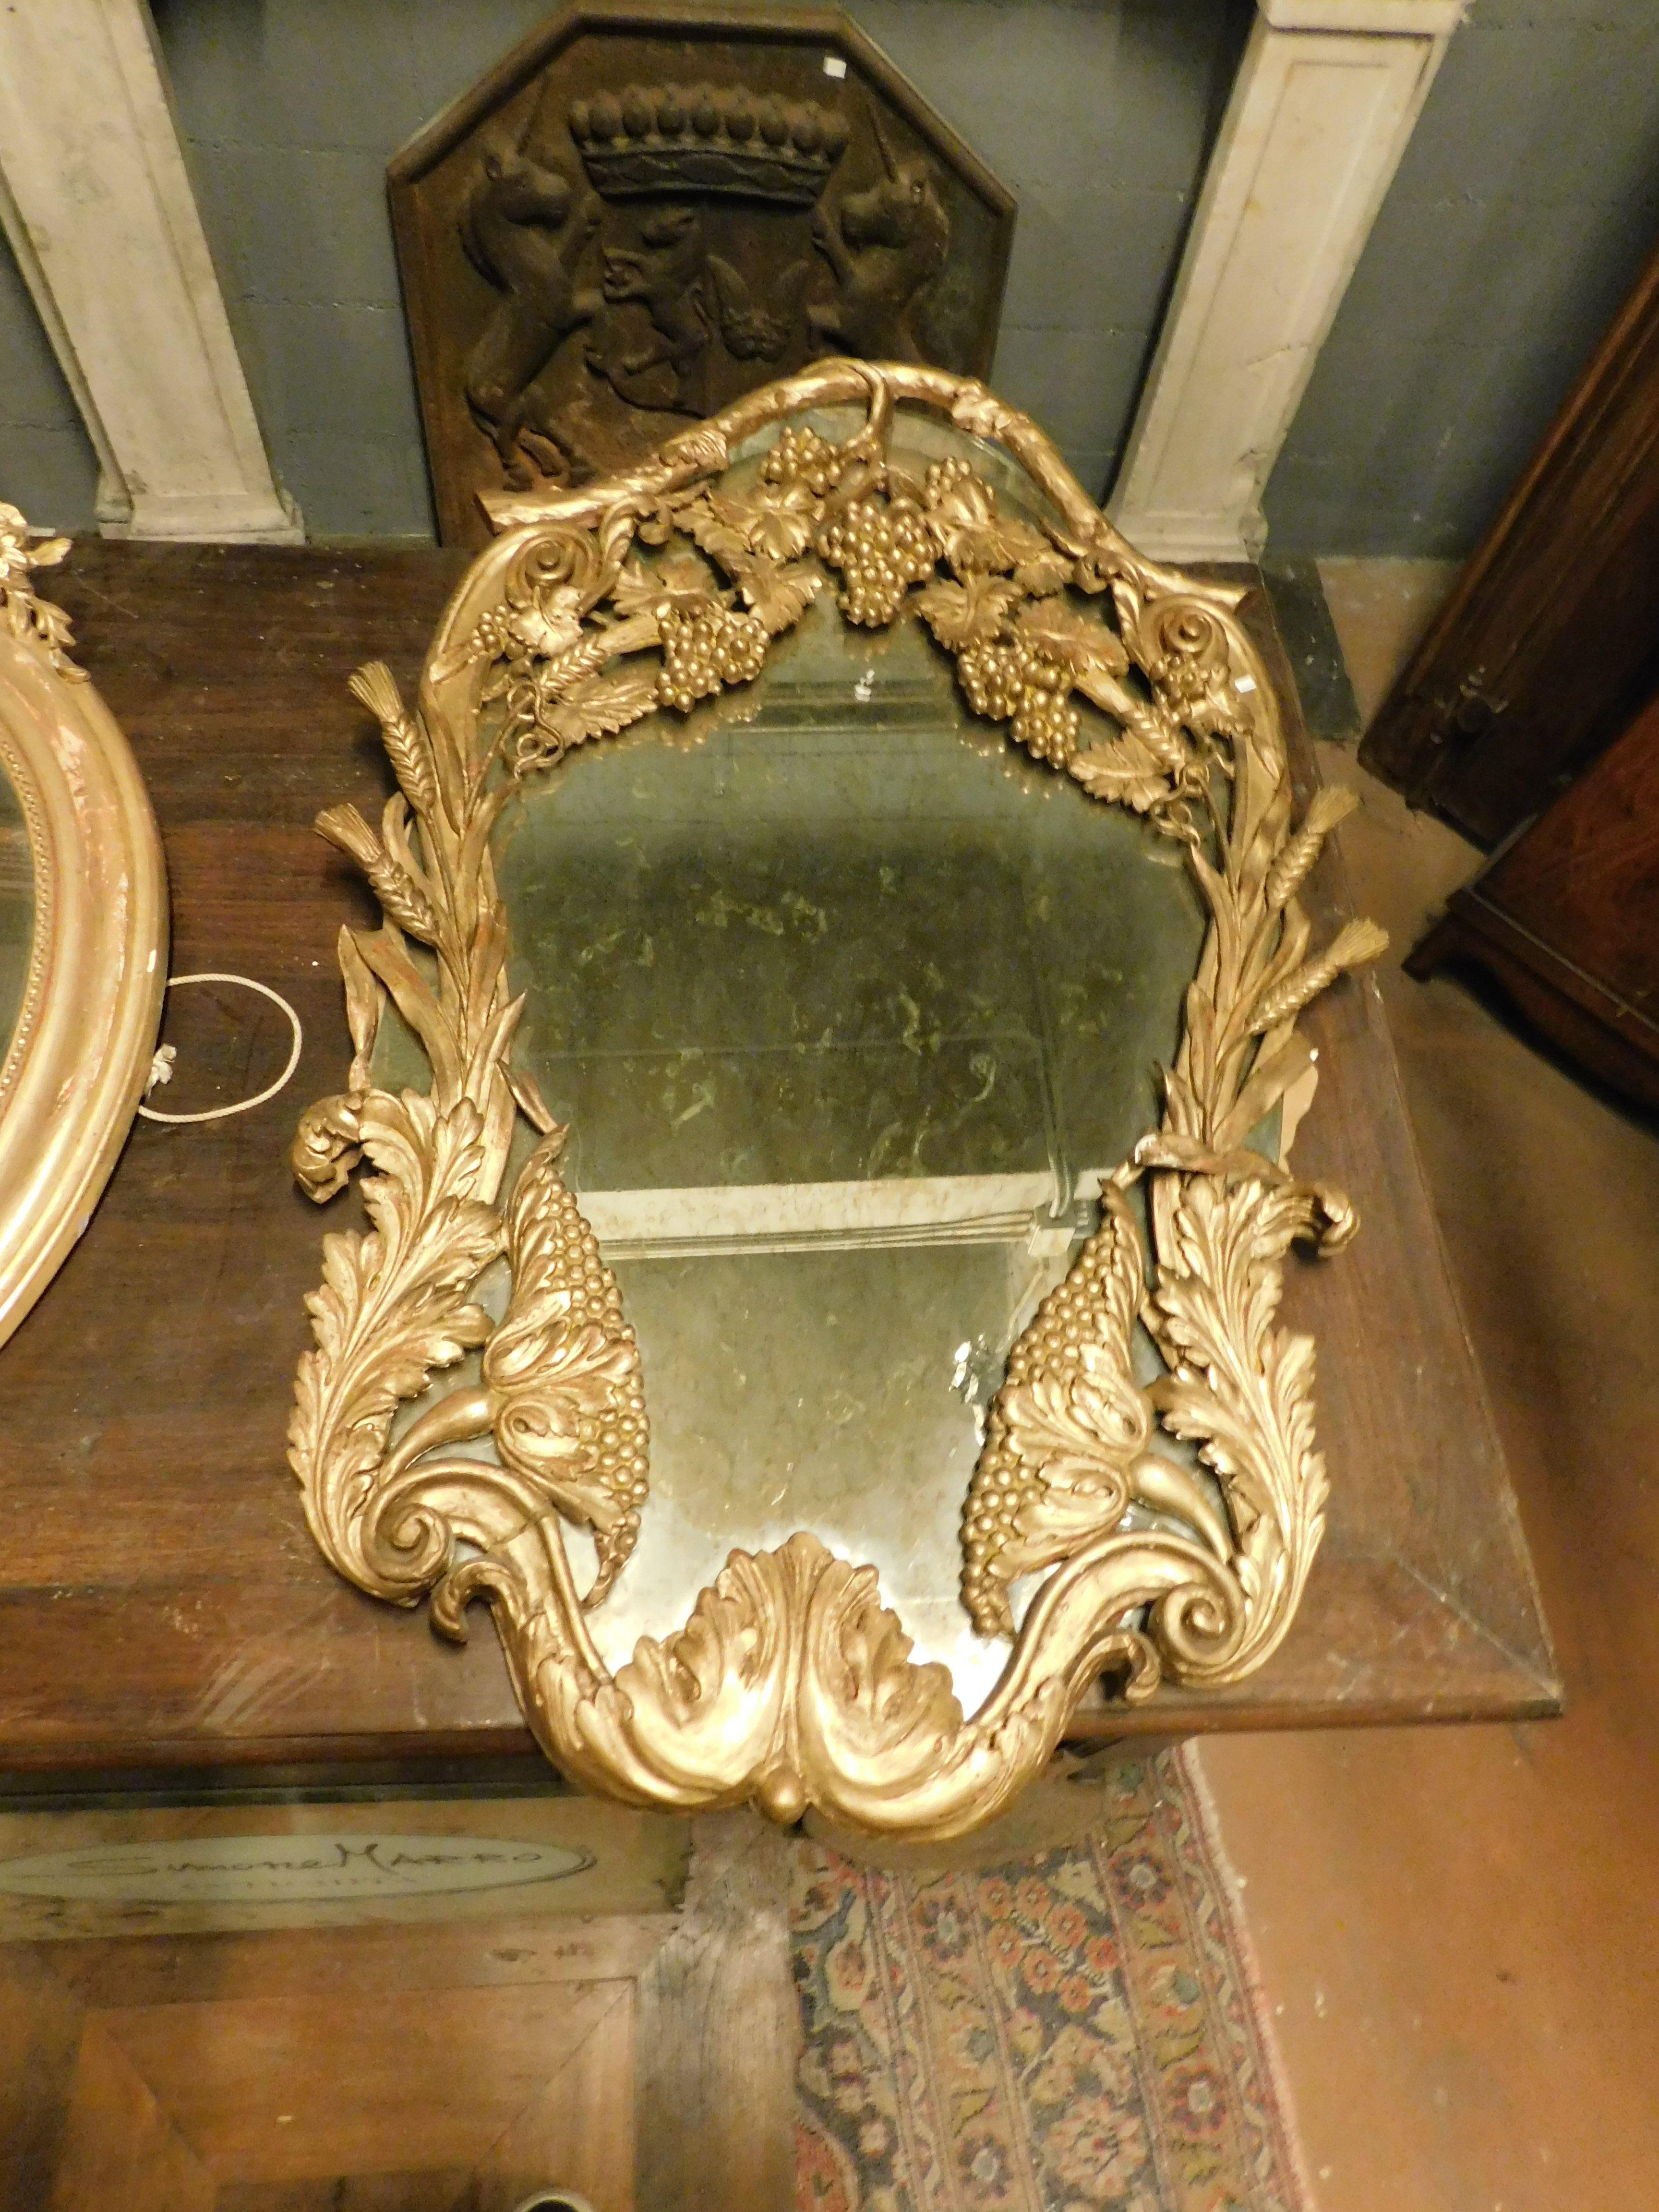 Ancient mirror richly carved by hand, with floral decorations and grapes, gilded, built in the 19th century in Italy.
Thanks to its richness of shape and good size, it can be easily adapted to all interiors: bathrooms, living rooms, halls, above